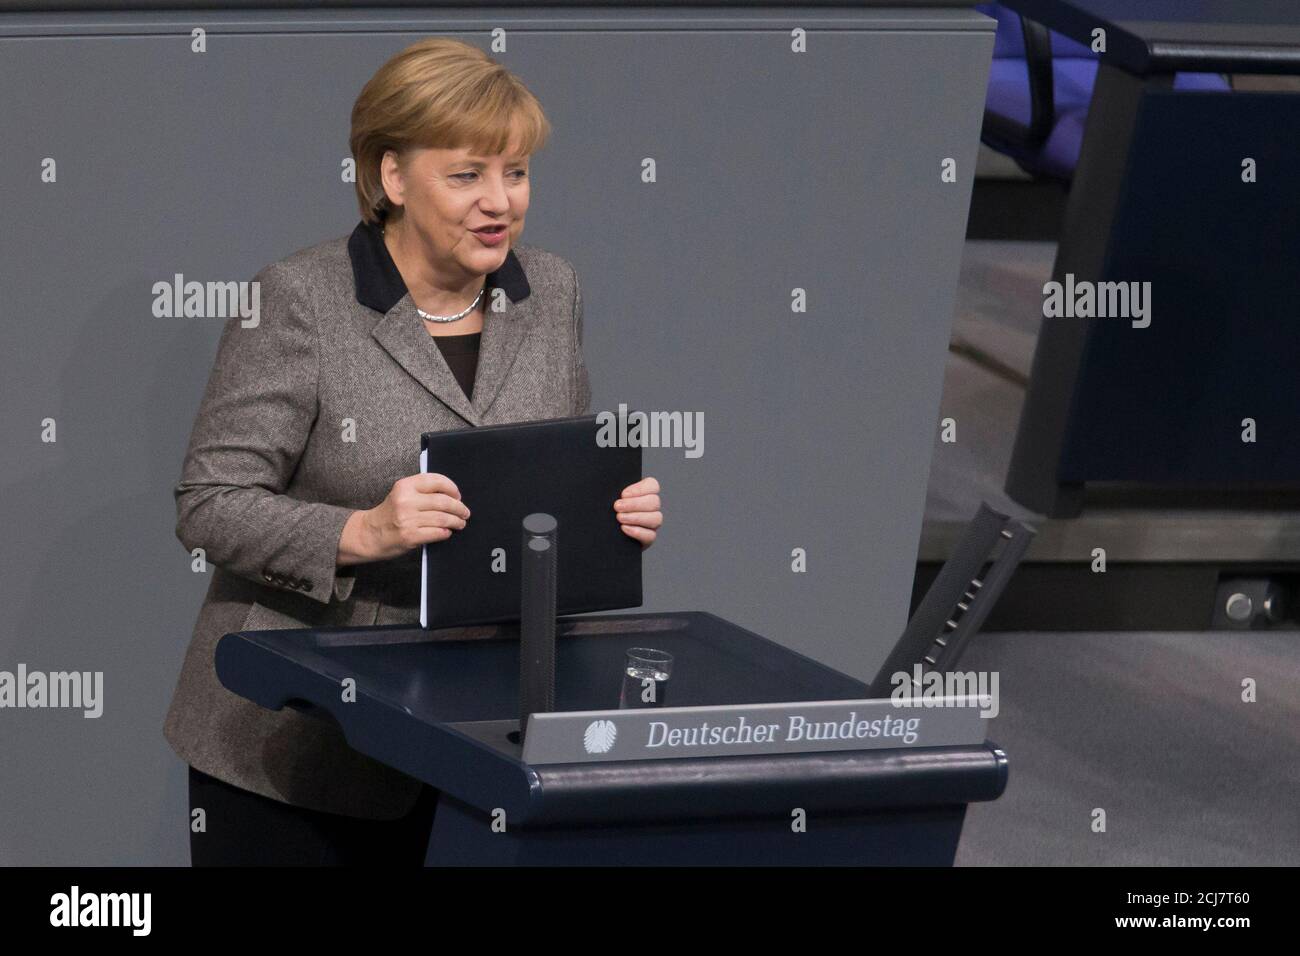 German Chancellor Angela Merkel delivers a government policy statement before the German lower house of parliament, the Bundestag, in Berlin, December 13, 2012. REUTERS/Thomas Peter (GERMANY - Tags: POLITICS) Stock Photo